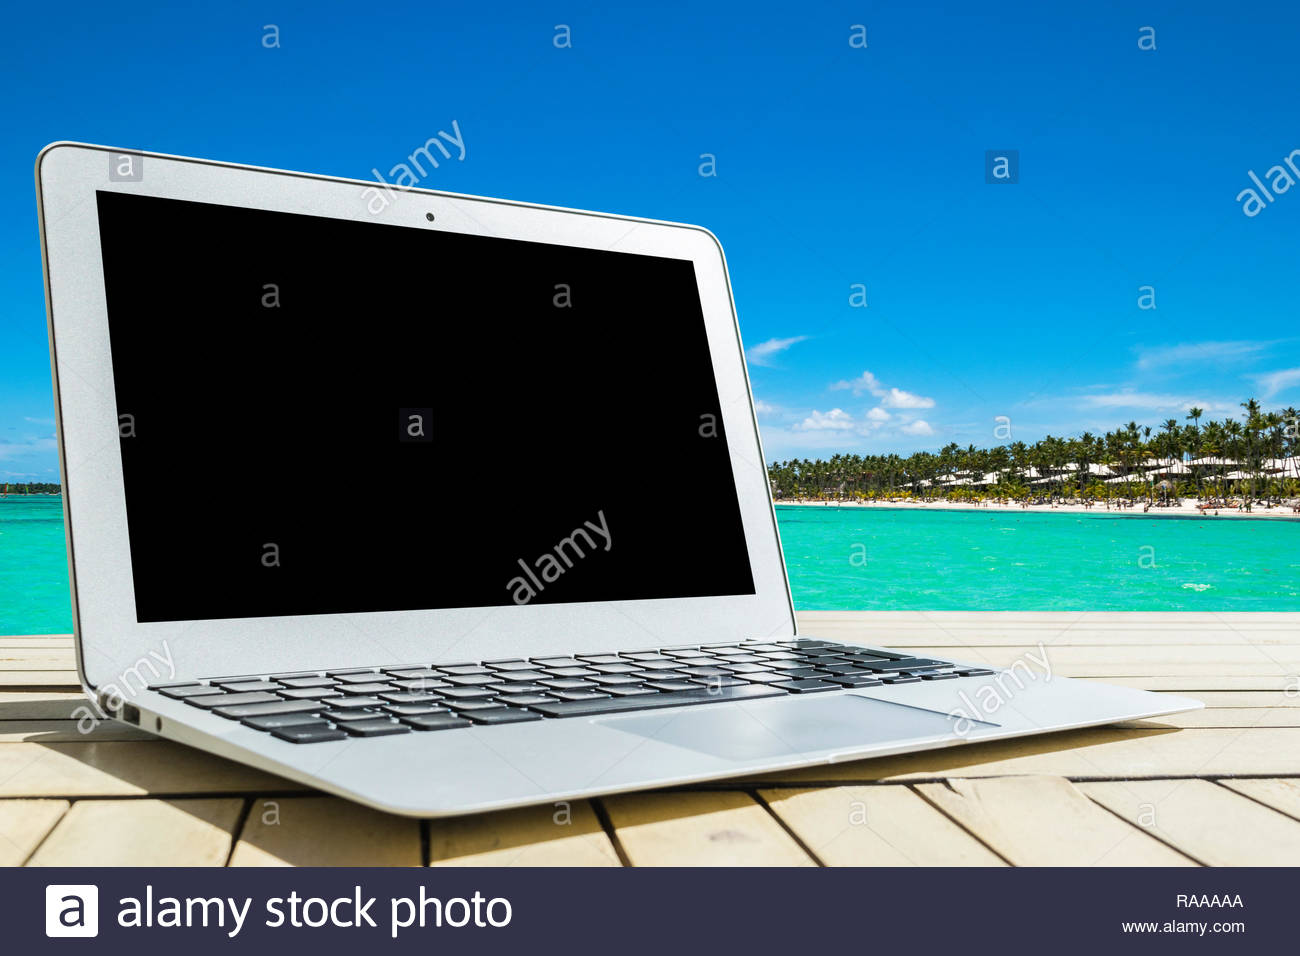 Laptop Puter On Wooden Table Top Ocean Tropical Island